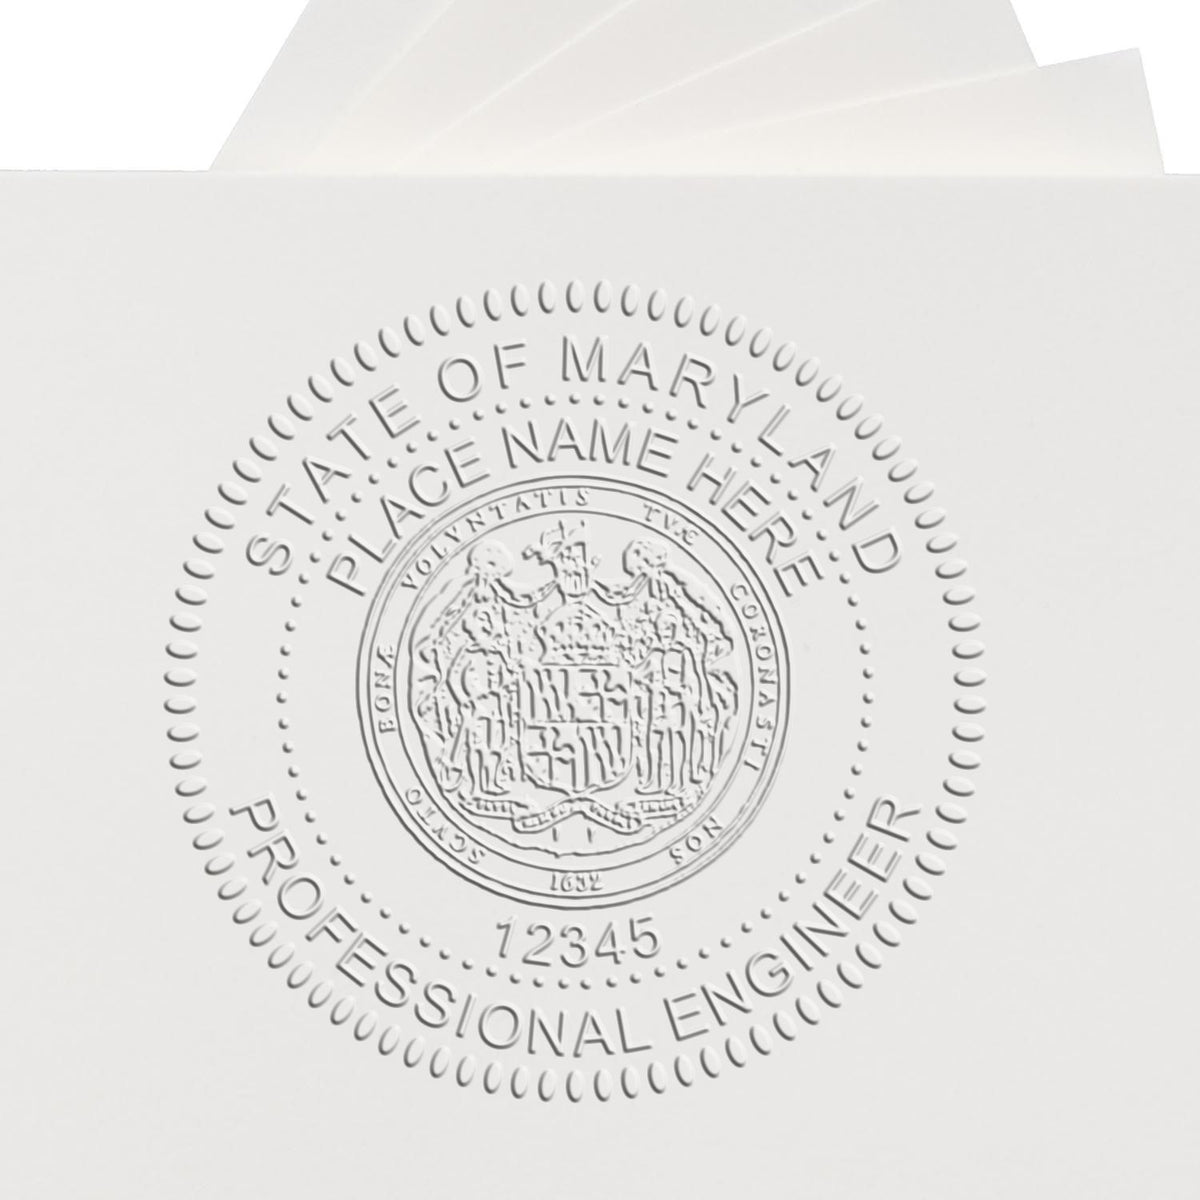 An alternative view of the State of Maryland Extended Long Reach Engineer Seal stamped on a sheet of paper showing the image in use